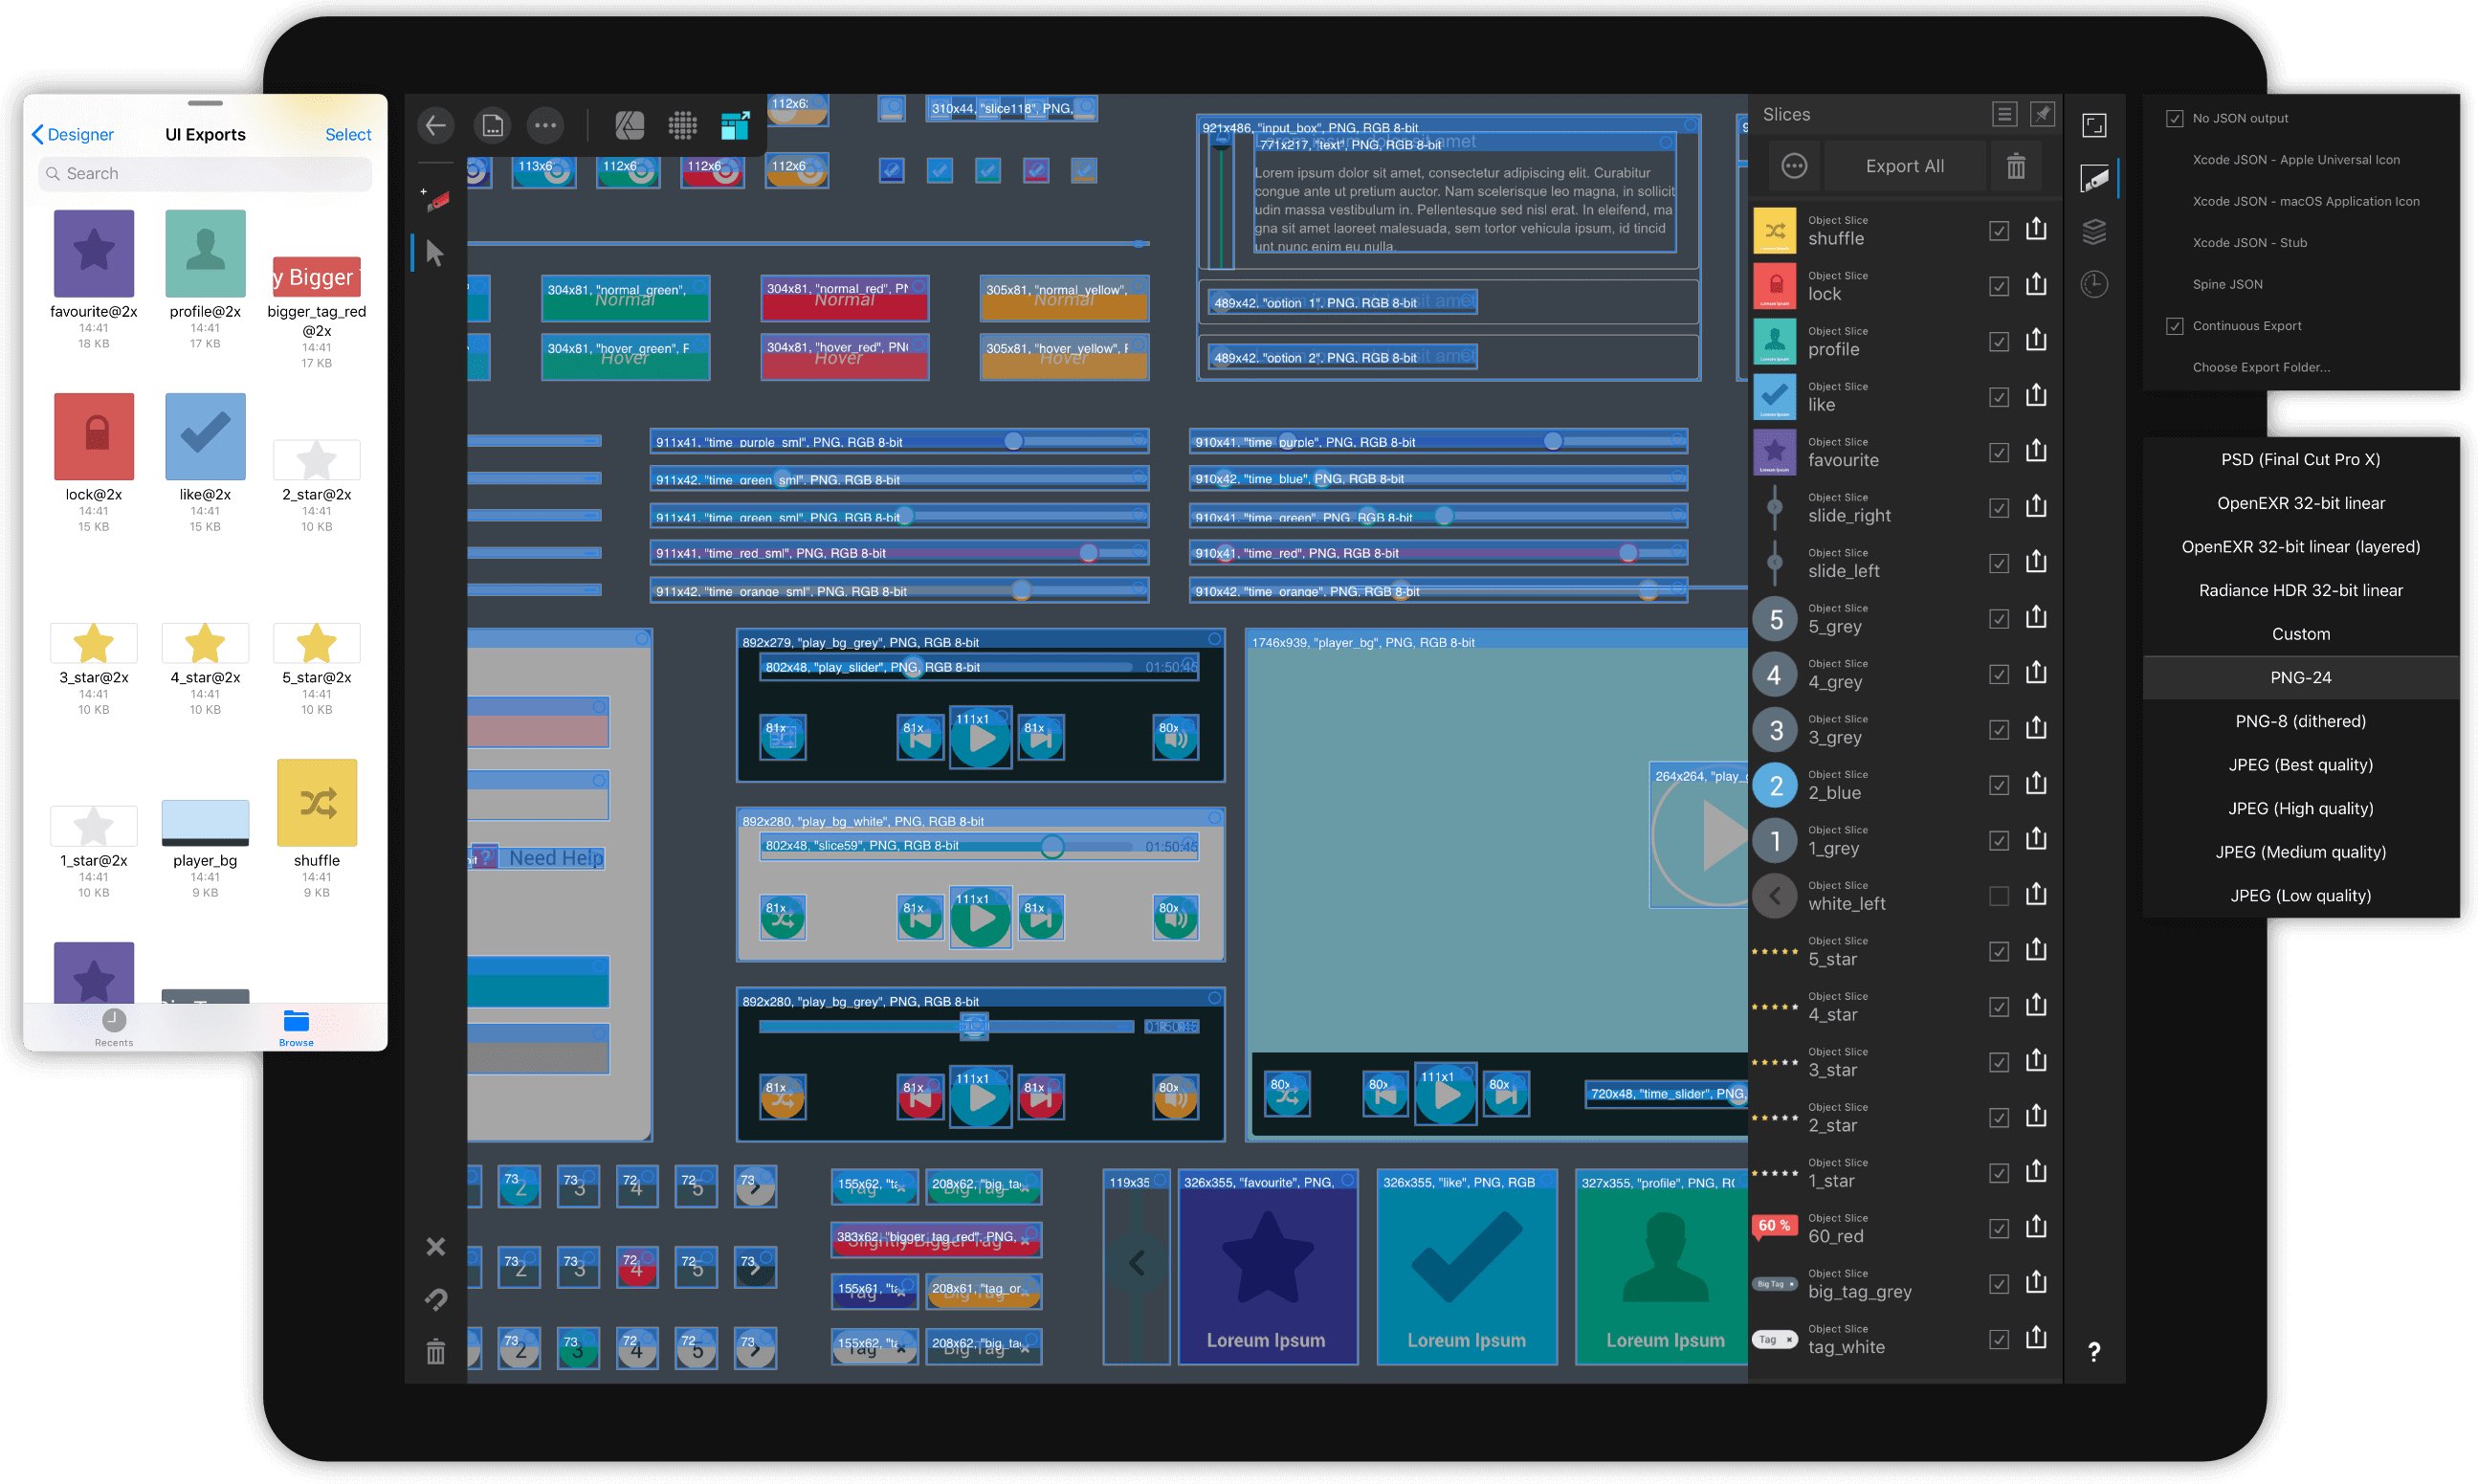 Affinity Designer for iPad lets you prototype user interfaces, web designs and more